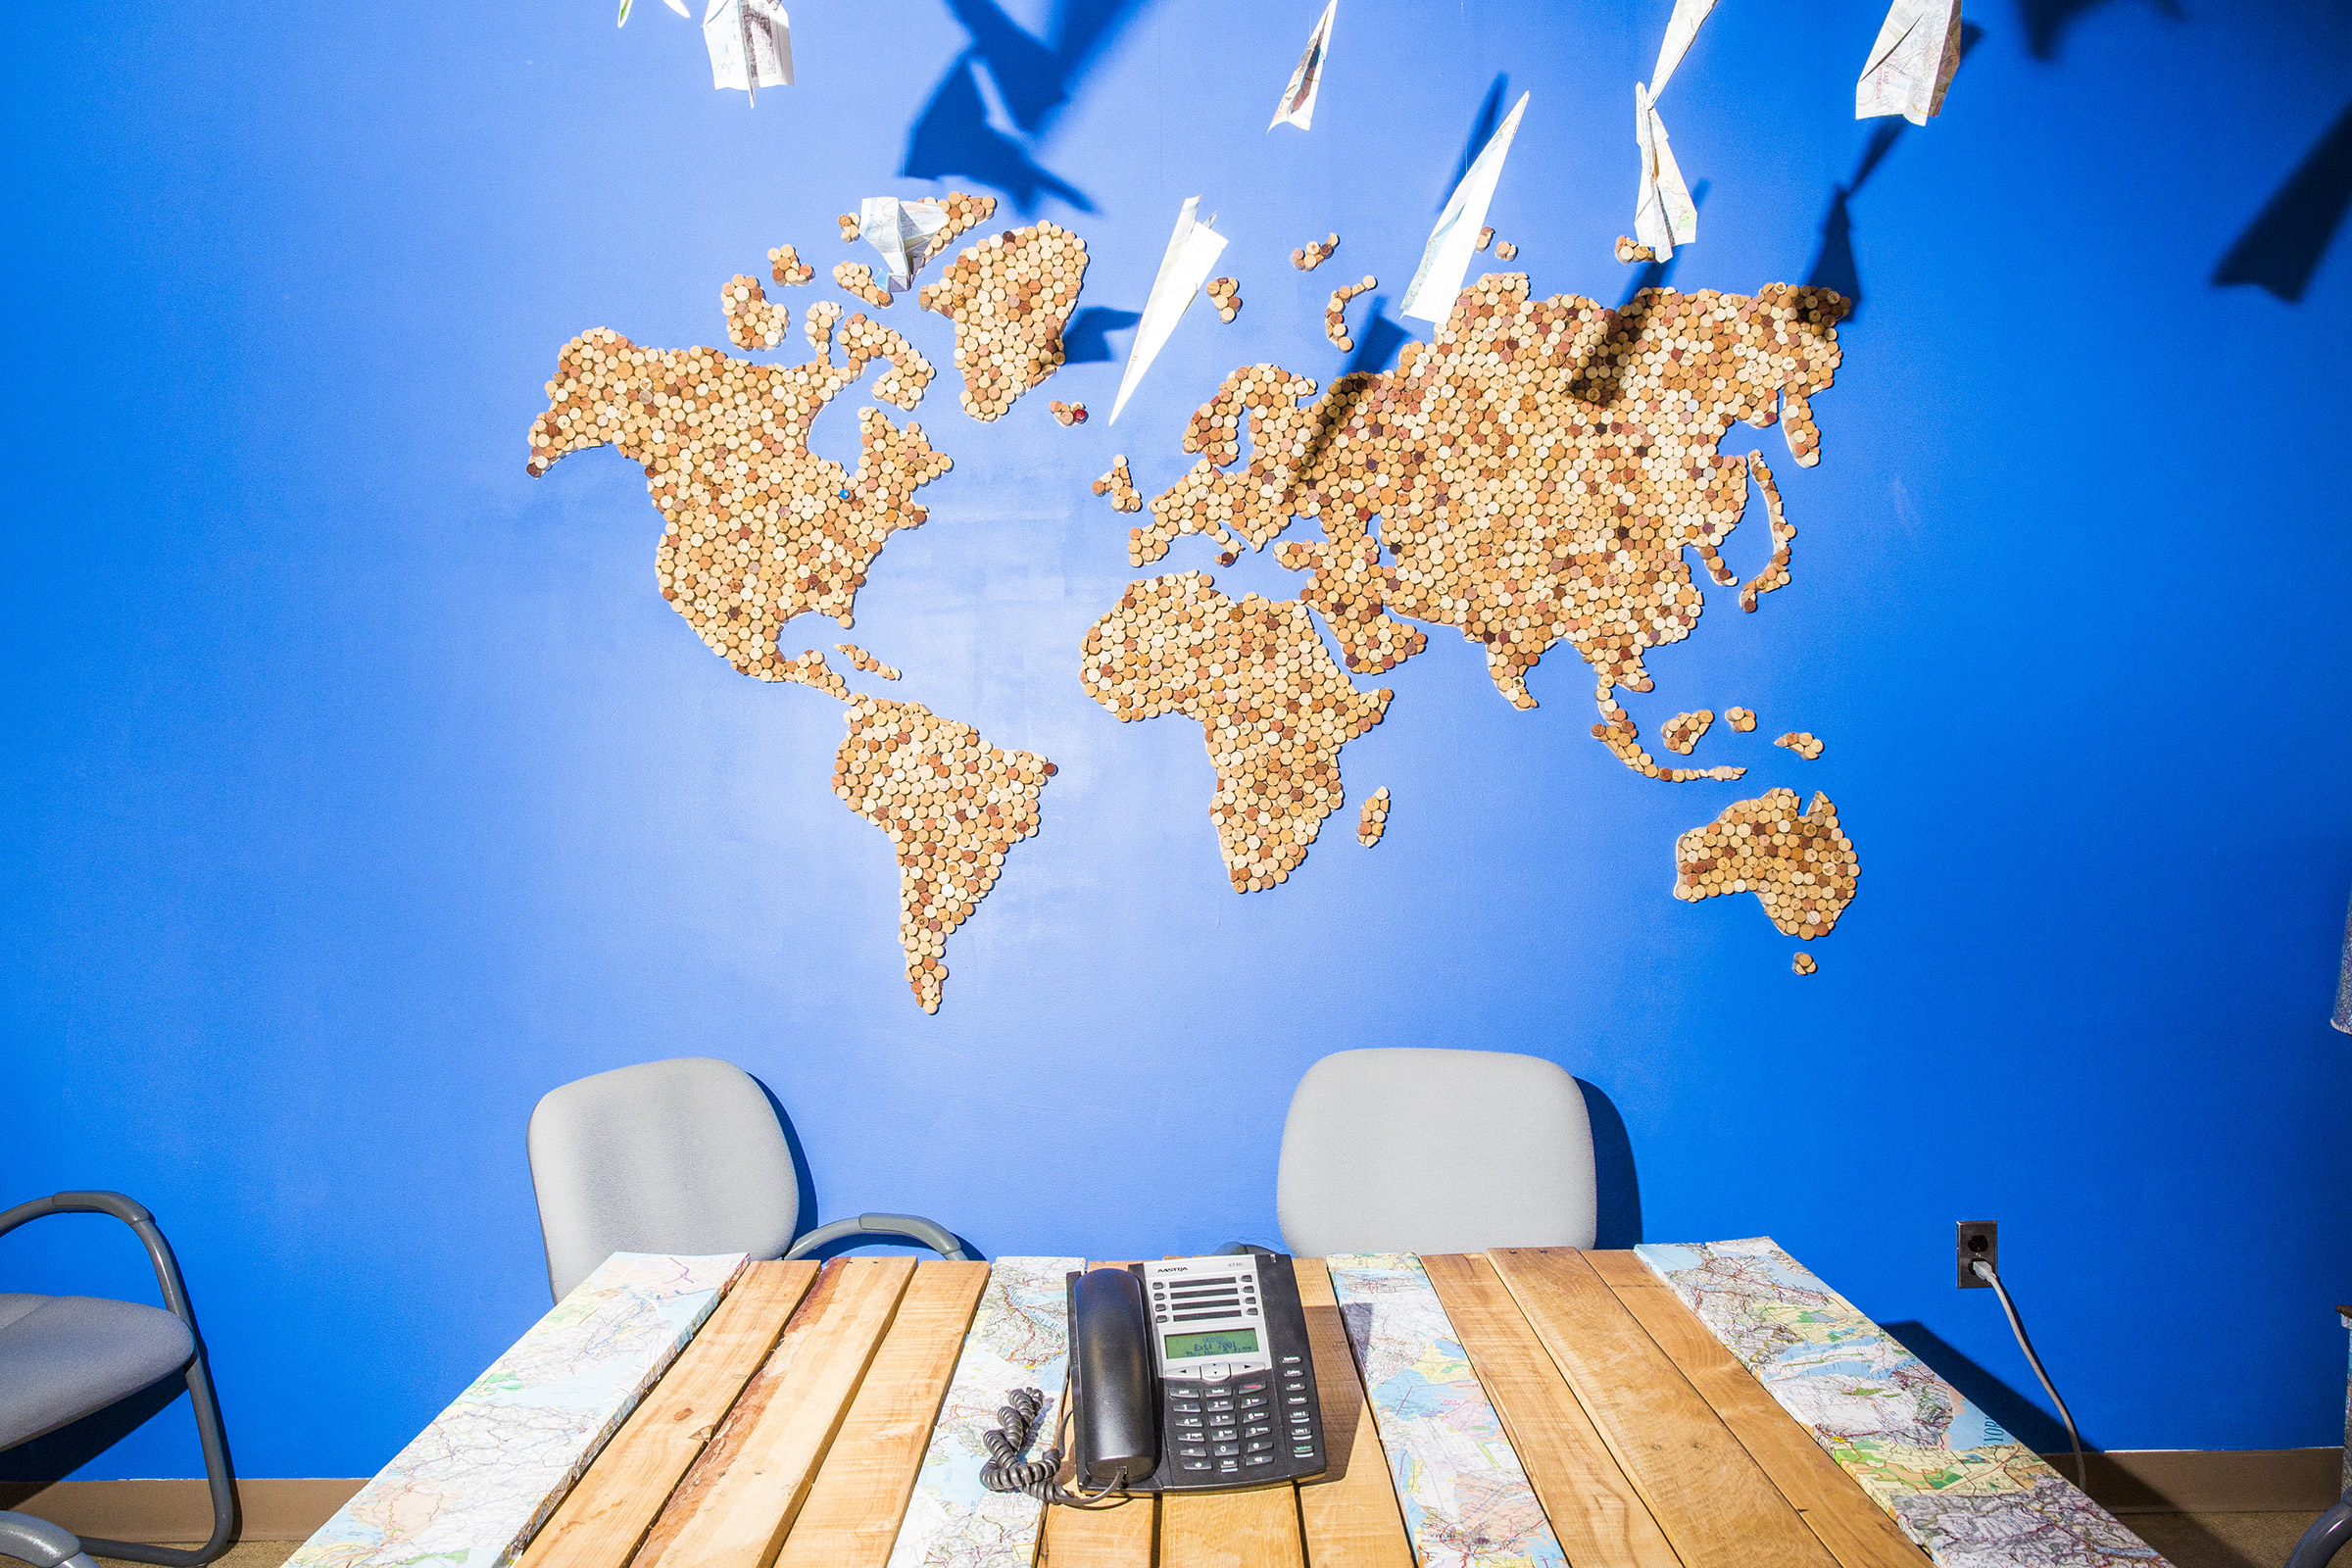 A map of the world made from bottle corks is displayed on a wall at TerraCycle headquarters in Trenton, N.J., on Nov. 9, 2017. (David Williams—Bloomberg/Getty Images)